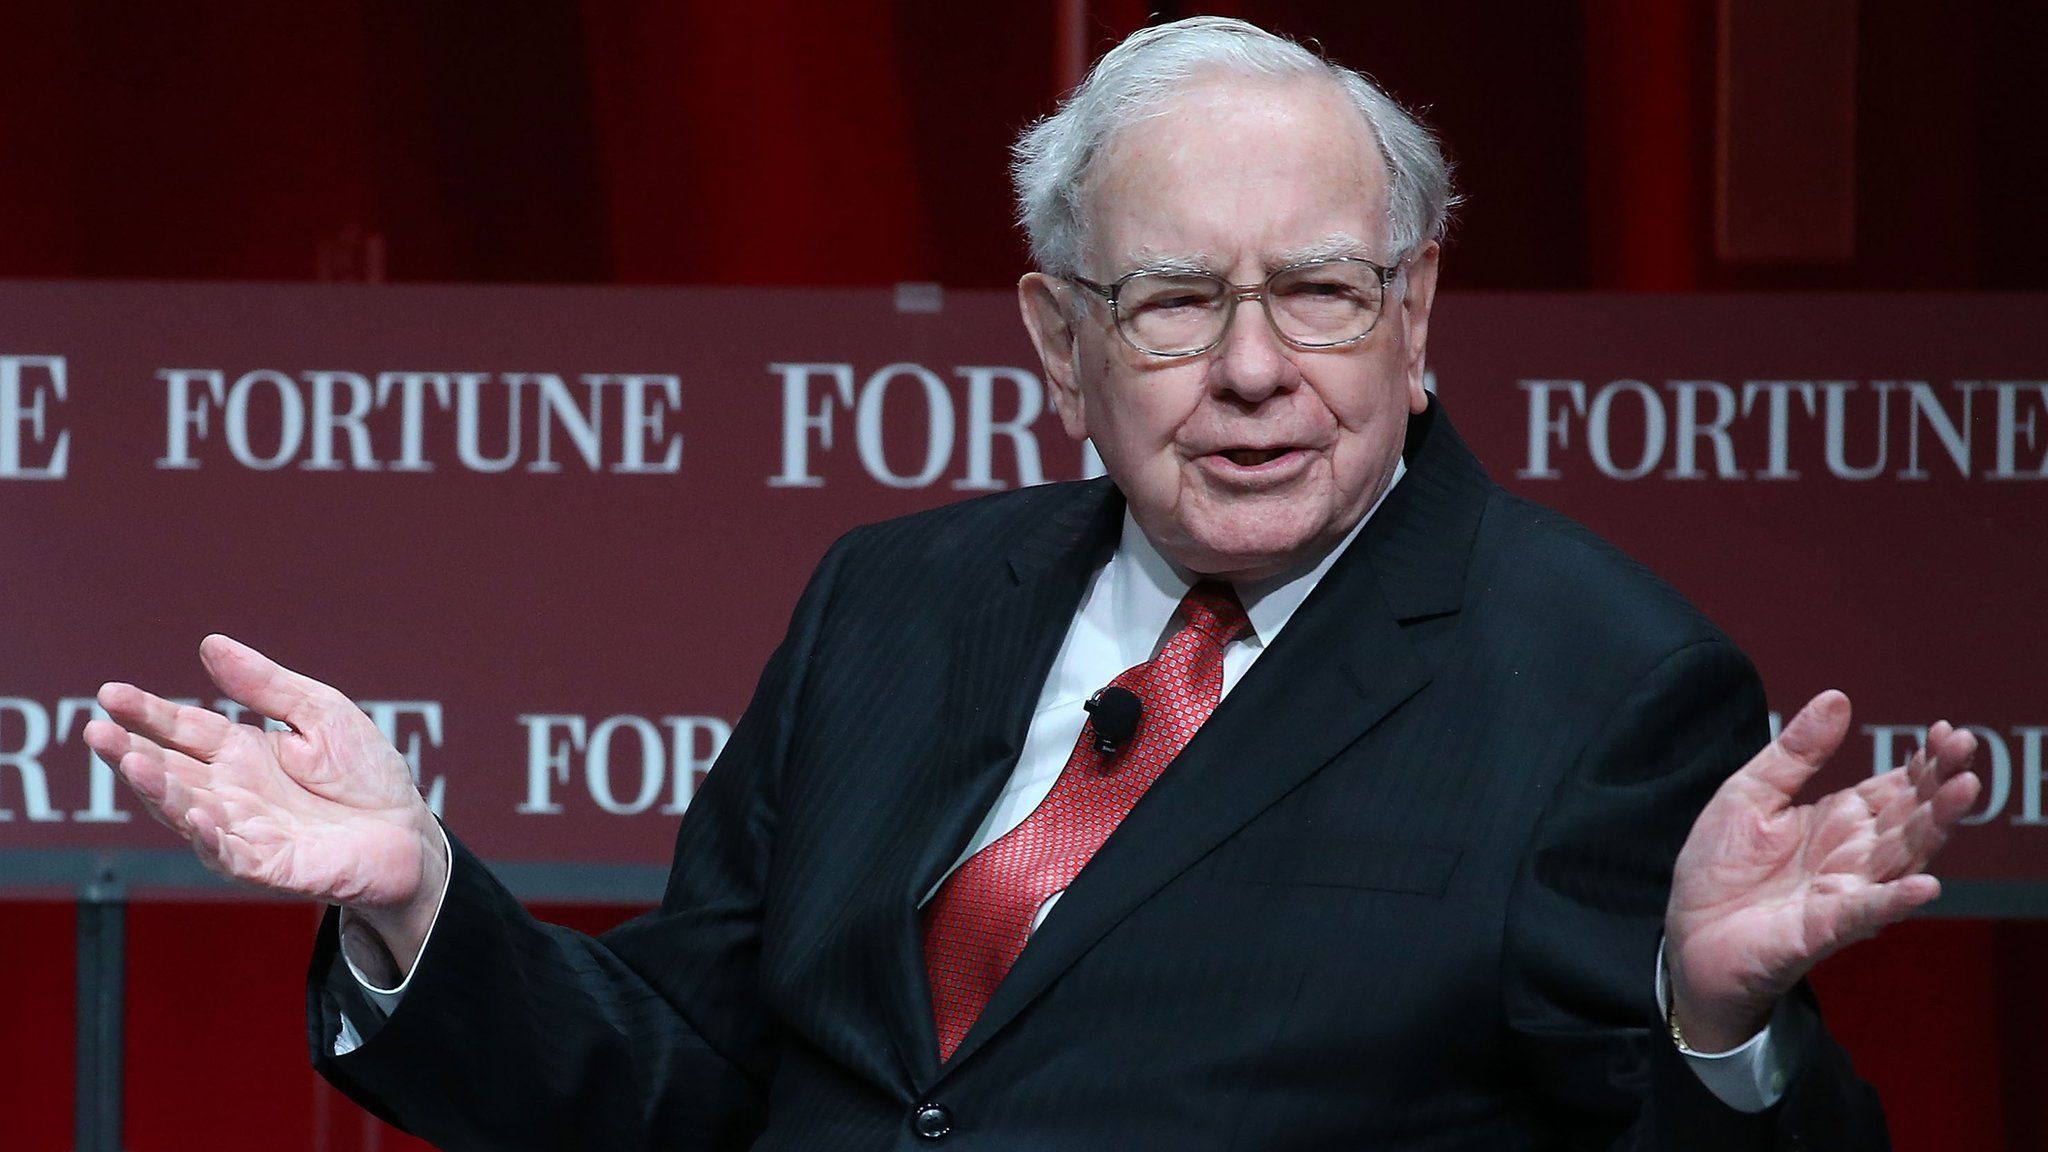 Warren Buffett, chairman and CEO of Berkshire Hathaway, speaks during the Fortune summit on 'The Most Powerful Women' at the Mandarin Hotel October 13, 2015 in Washington, DC.